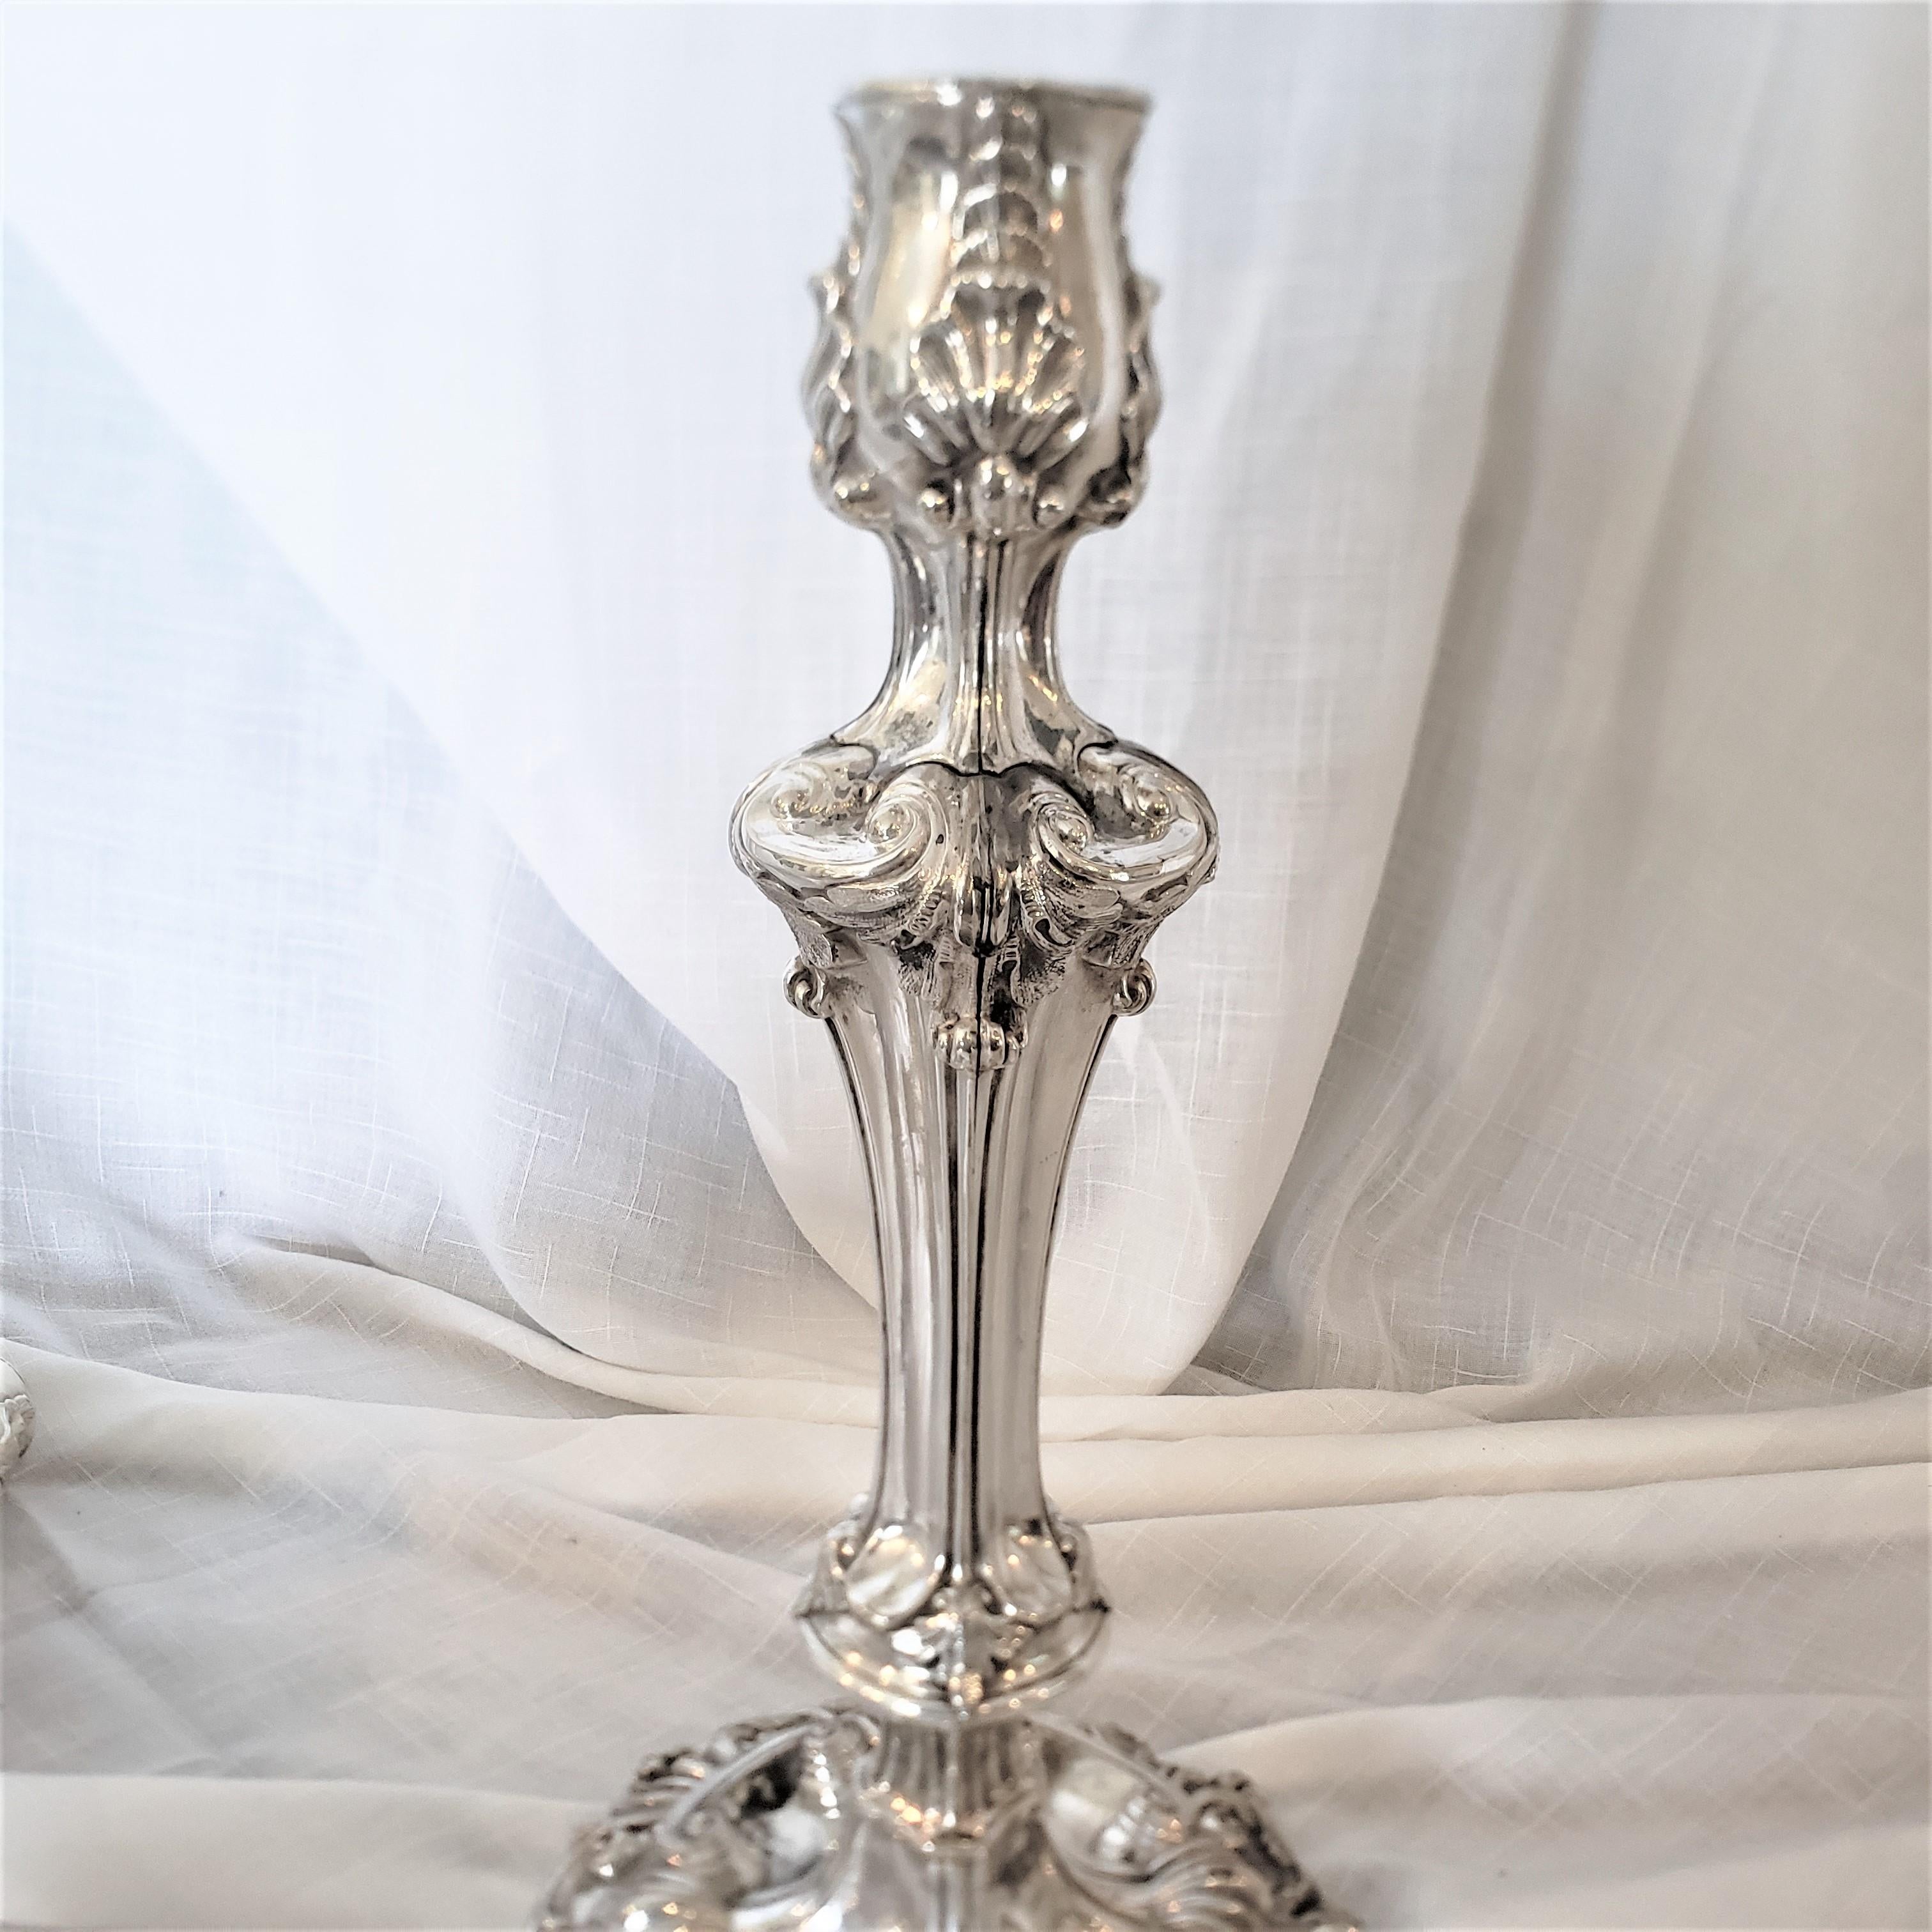 Pair of Antique Sheffield Plate Convertible 3 Branch Candlesticks or Candelabra For Sale 2